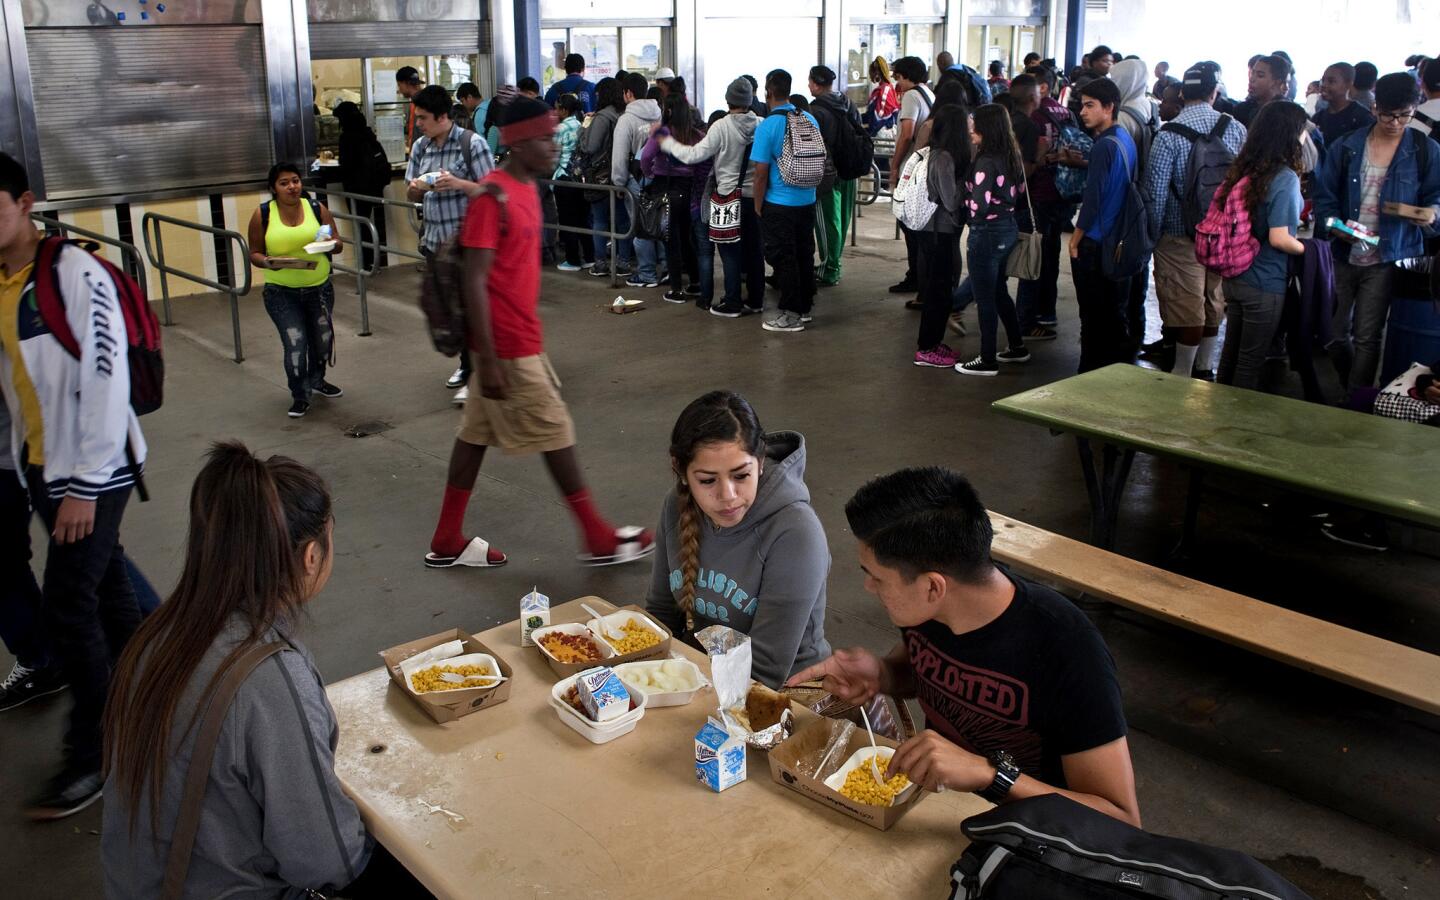 Mele Vehikite, 16, left, Ellie Gutierrez, 17, and Antonio Ramos, 18, eat lunch at Washington Preparatory High School in L.A. The school is required to serve three items, including a fruit and a vegetable, even if students do not want them.